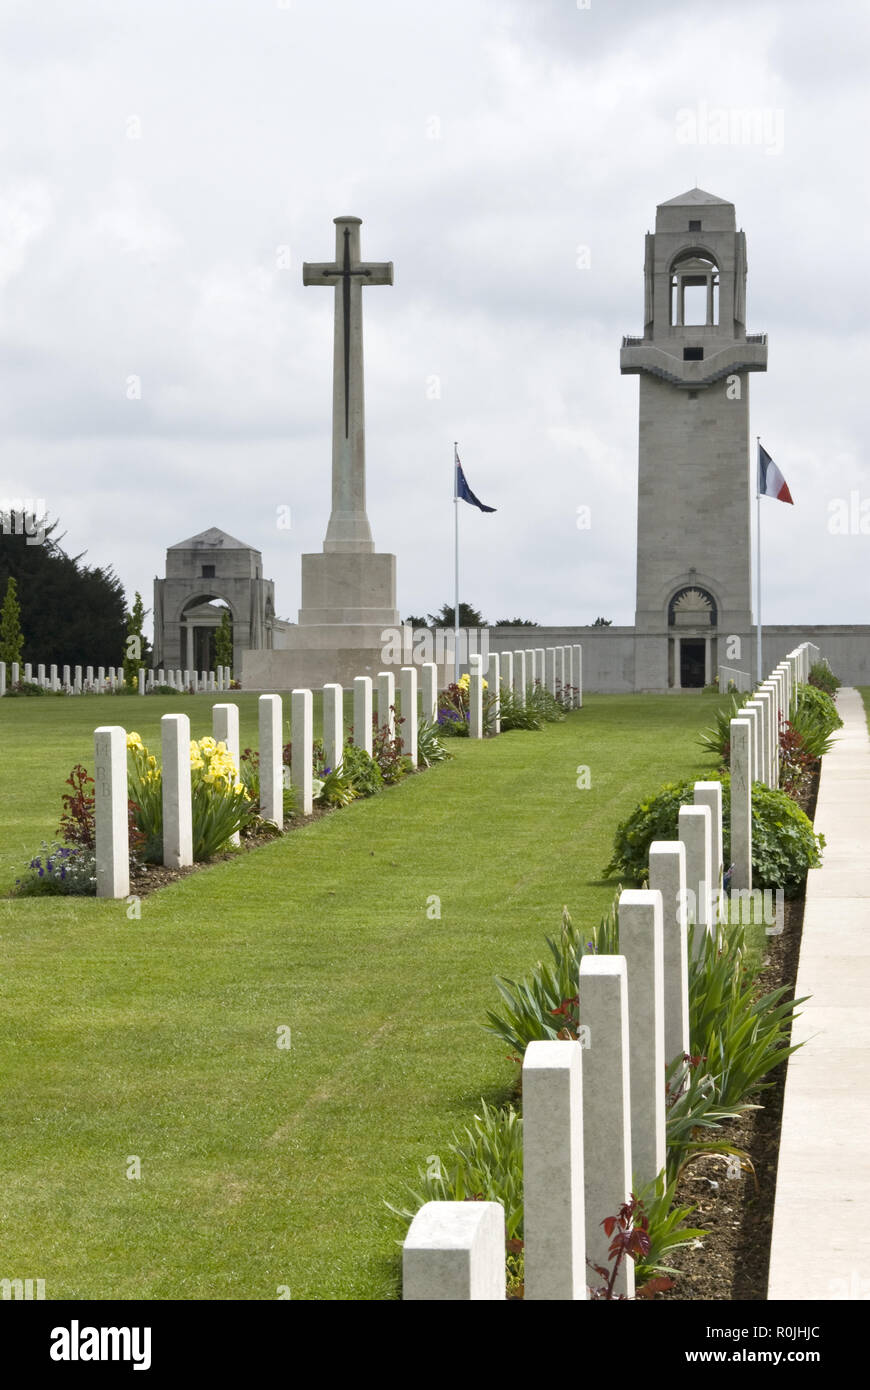 The Villers–Bretonneux Australian Nat. Memorial cemetery contains the graves of World War 1 British Commonwealth soldiers, Villers–Bretonneux, France. Stock Photo